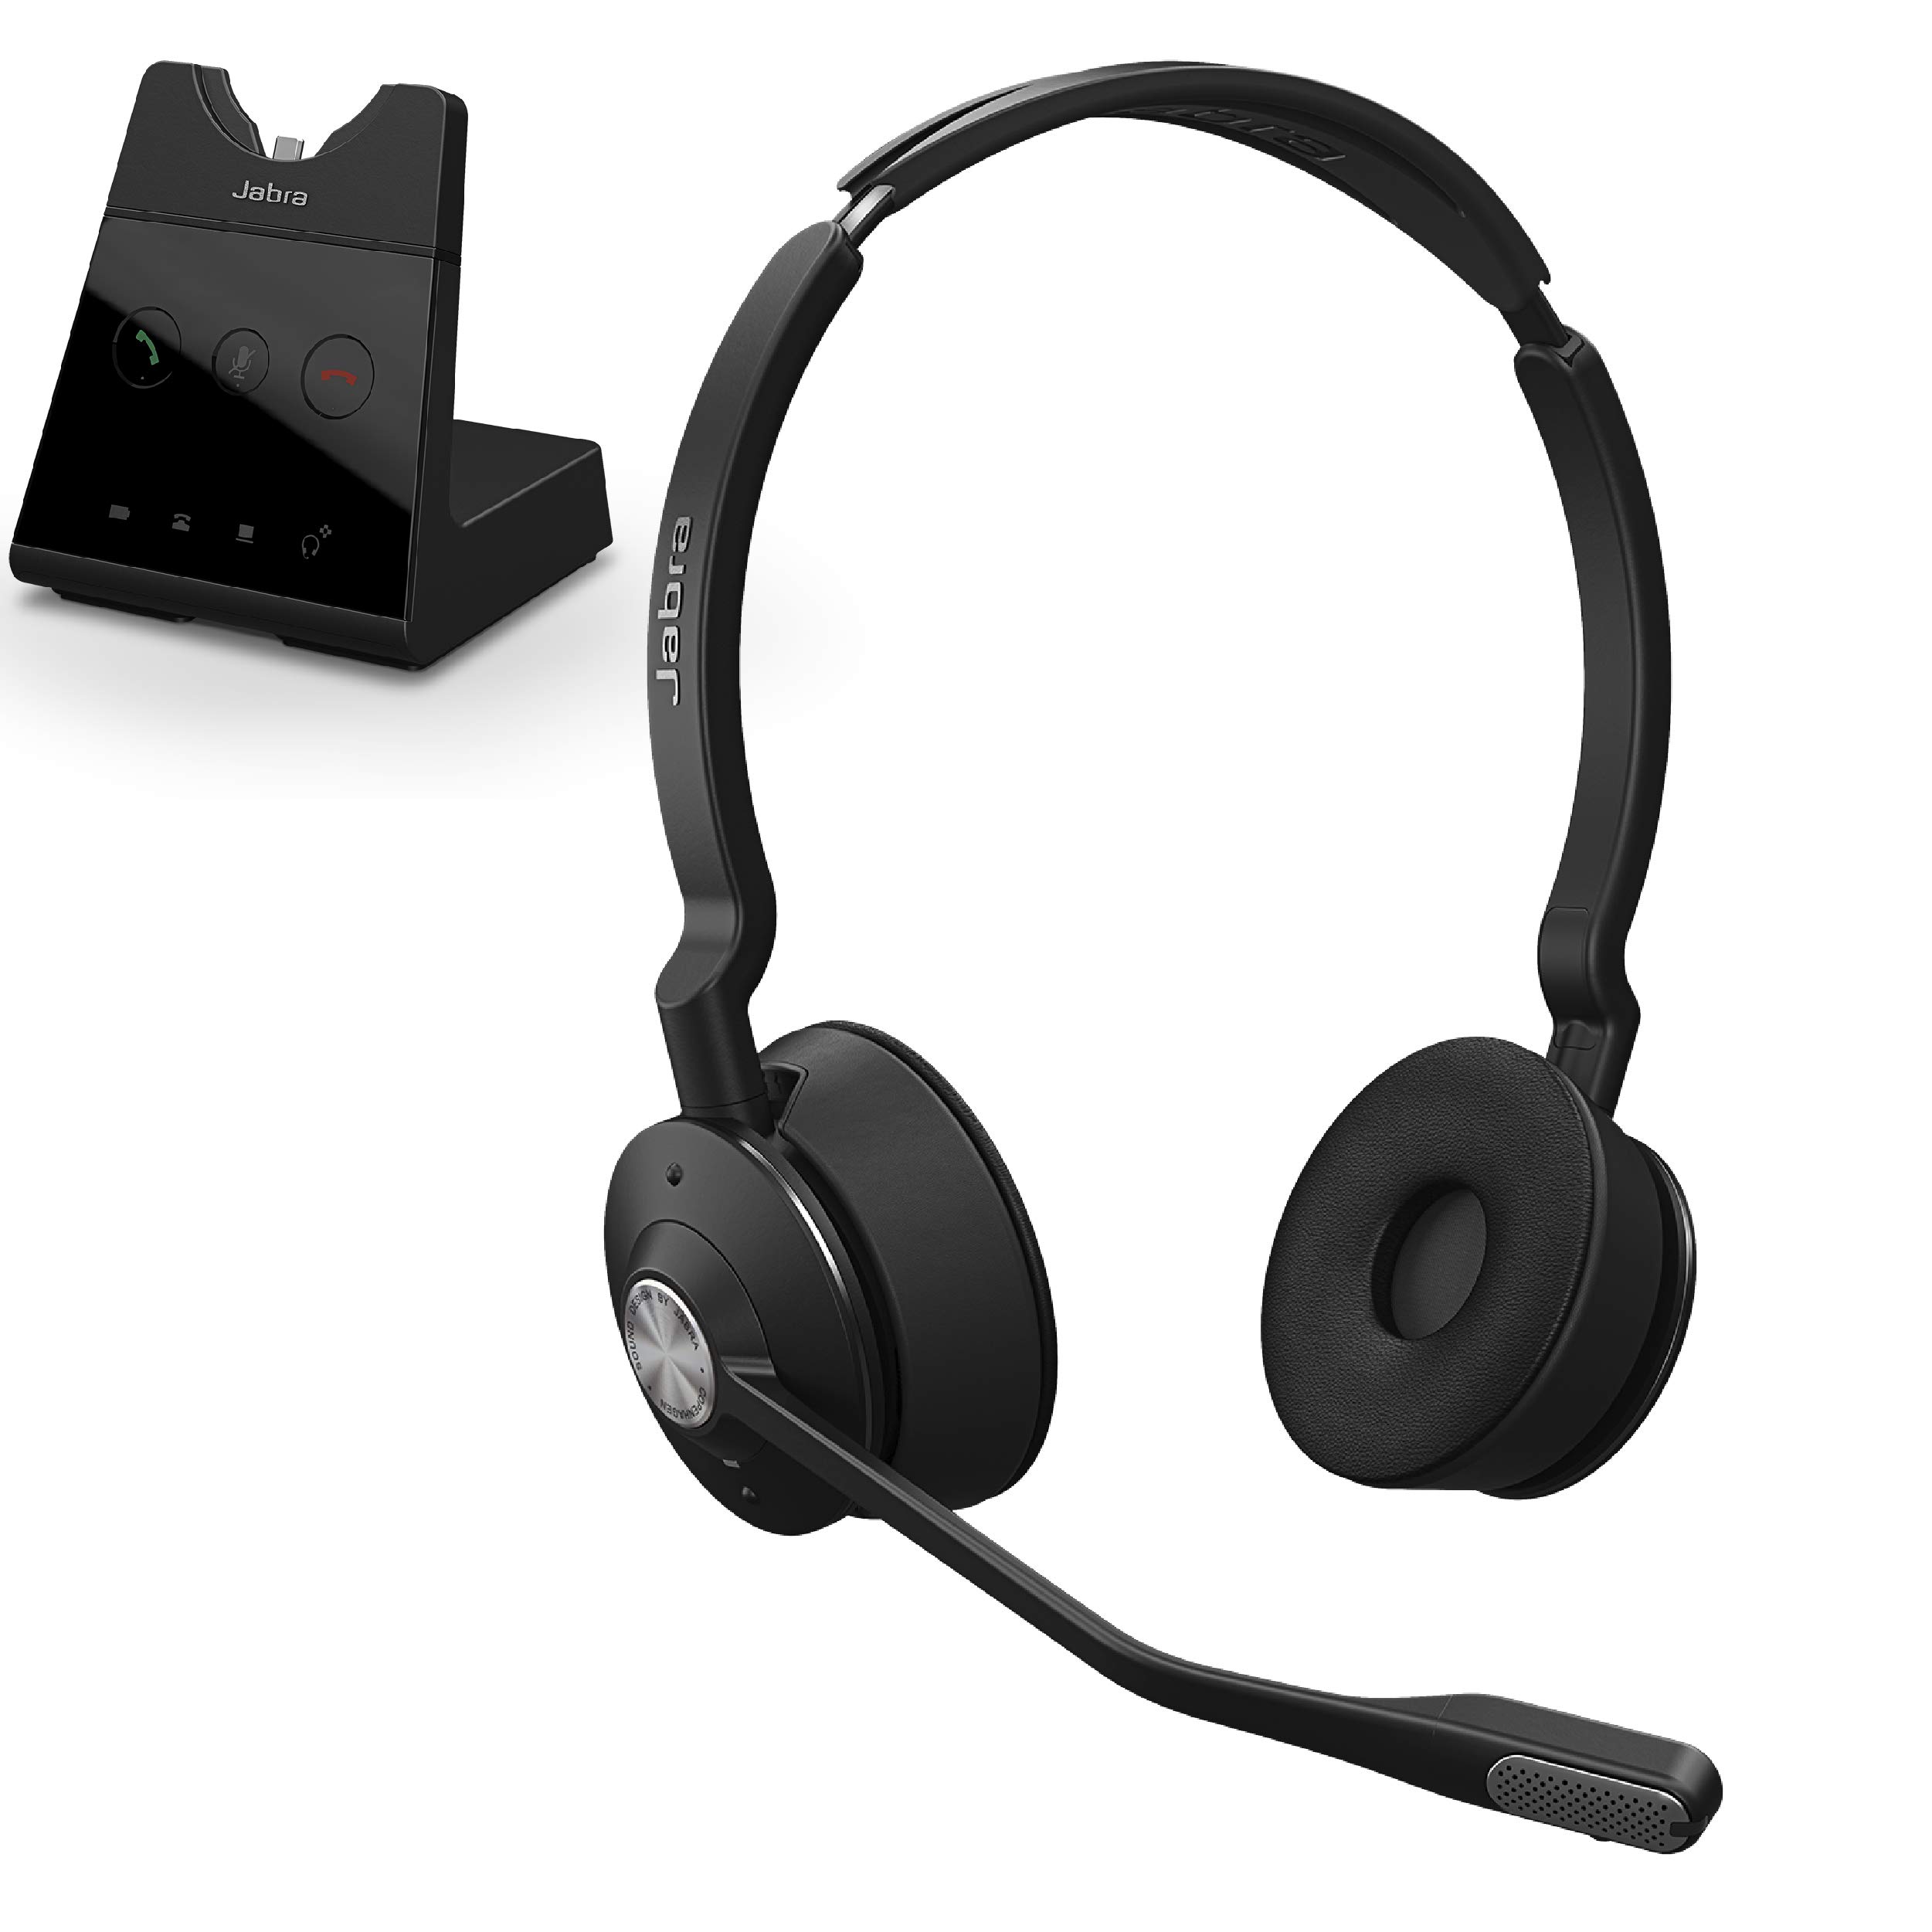 Jabra Engage 65 Wireless Headset, Stereo – Telephone Headset with Industry-Leading Wireless Performance, Advanced Noise-Cancelling Microphone, Call Center Headset with All Day Battery Life